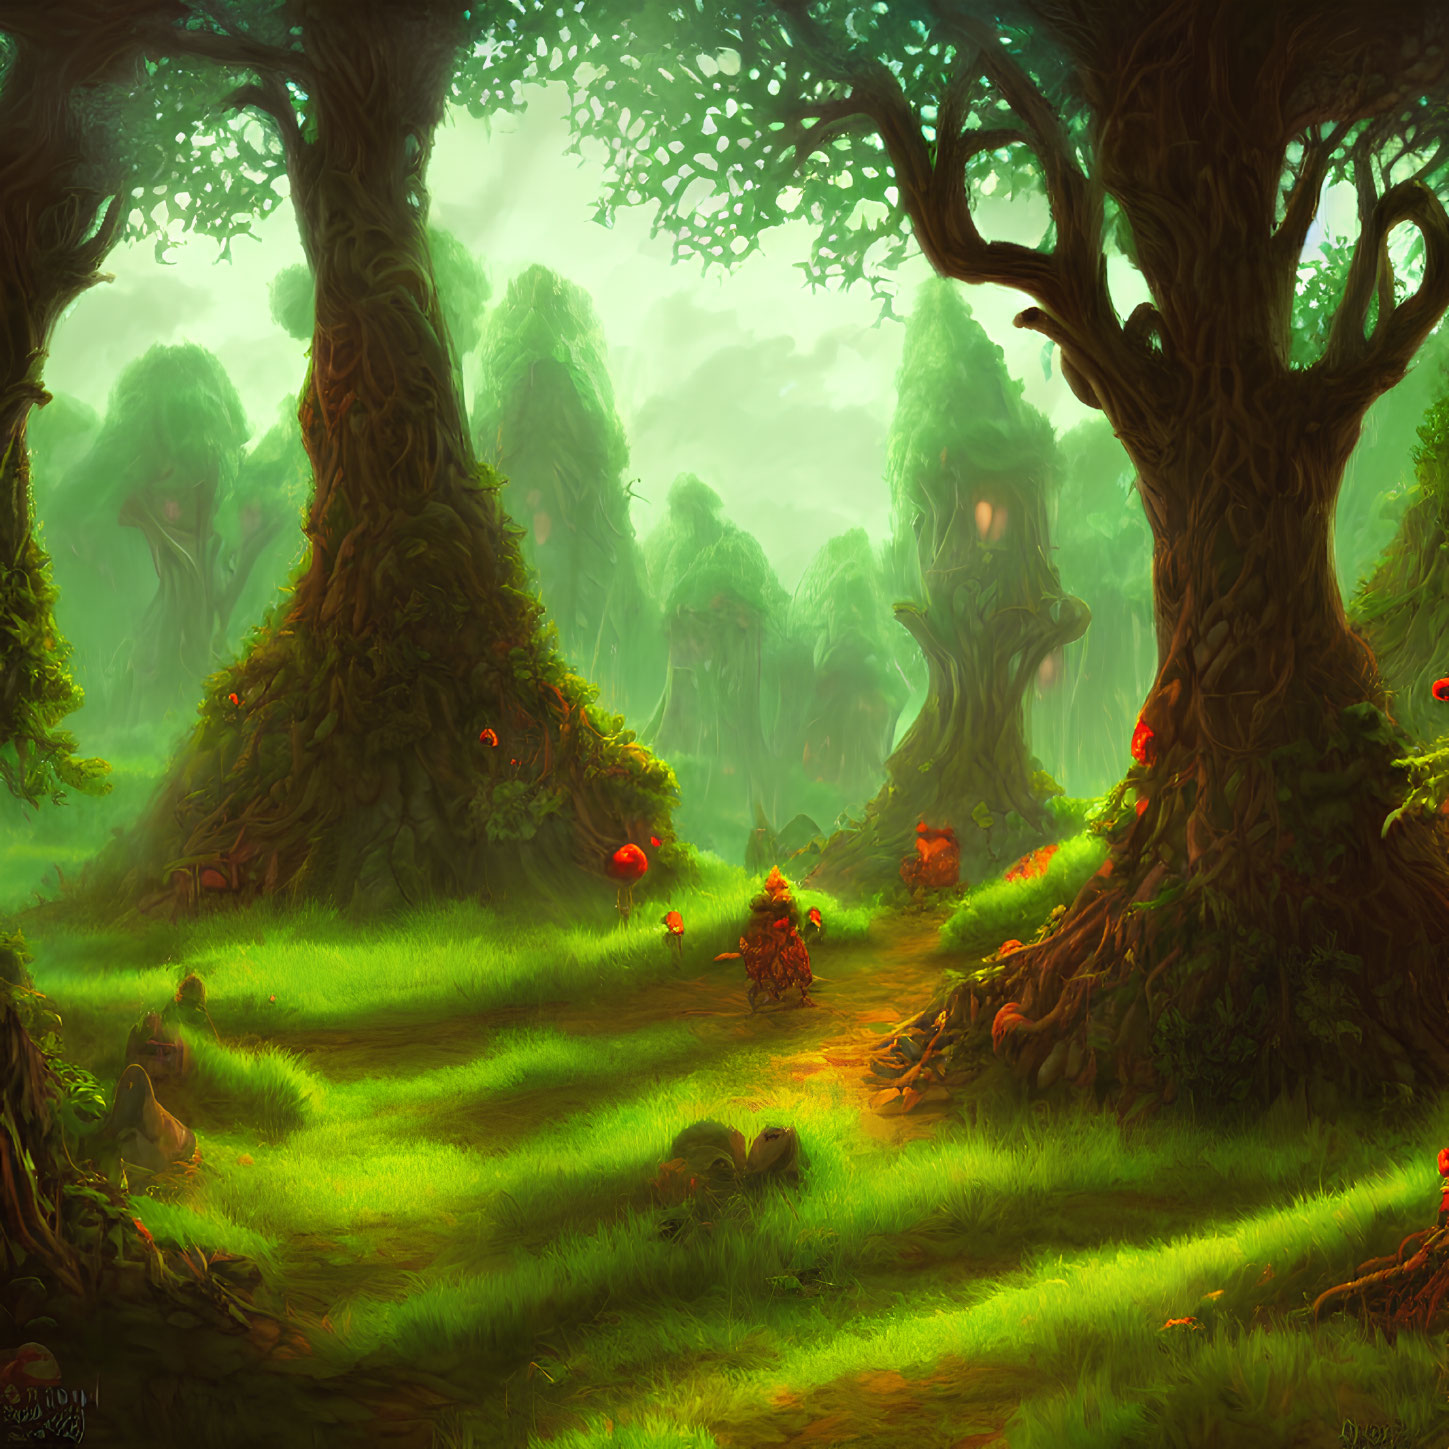 Fantasy forest with towering trees, vibrant grass, mysterious fog, and red-capped mushrooms